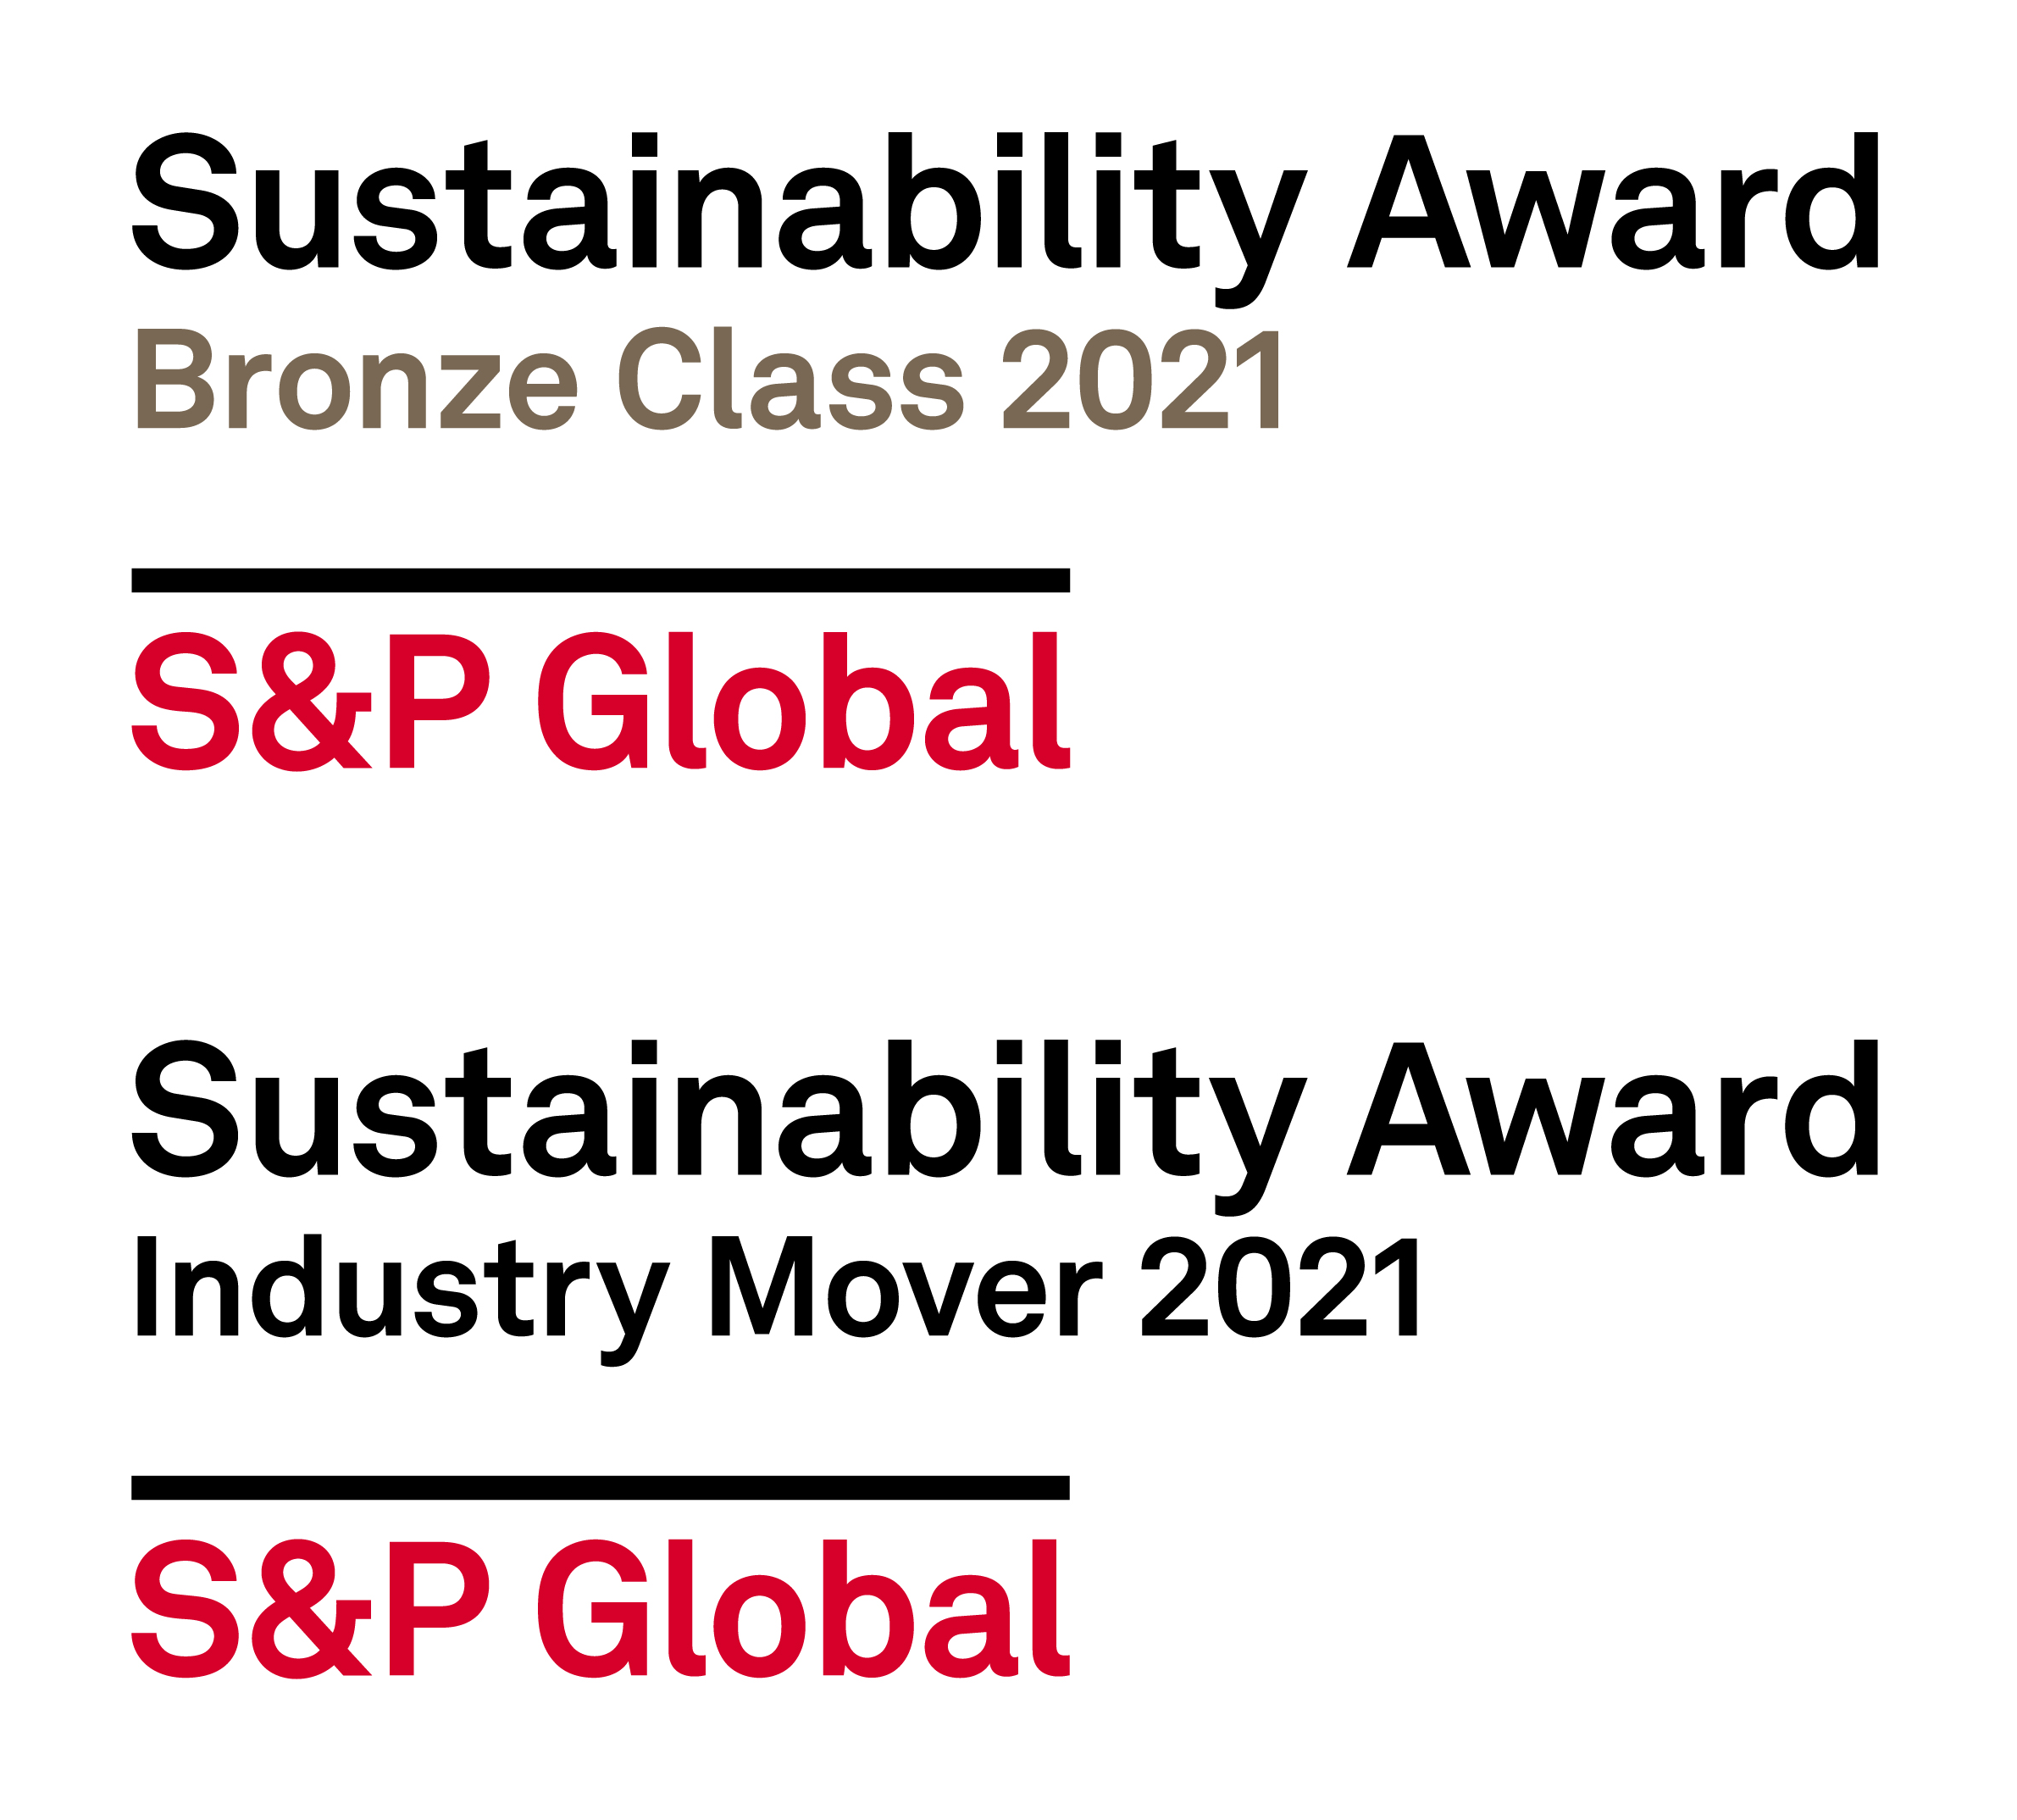 SPG-Sustainability Award 2021 Industry Mover Color